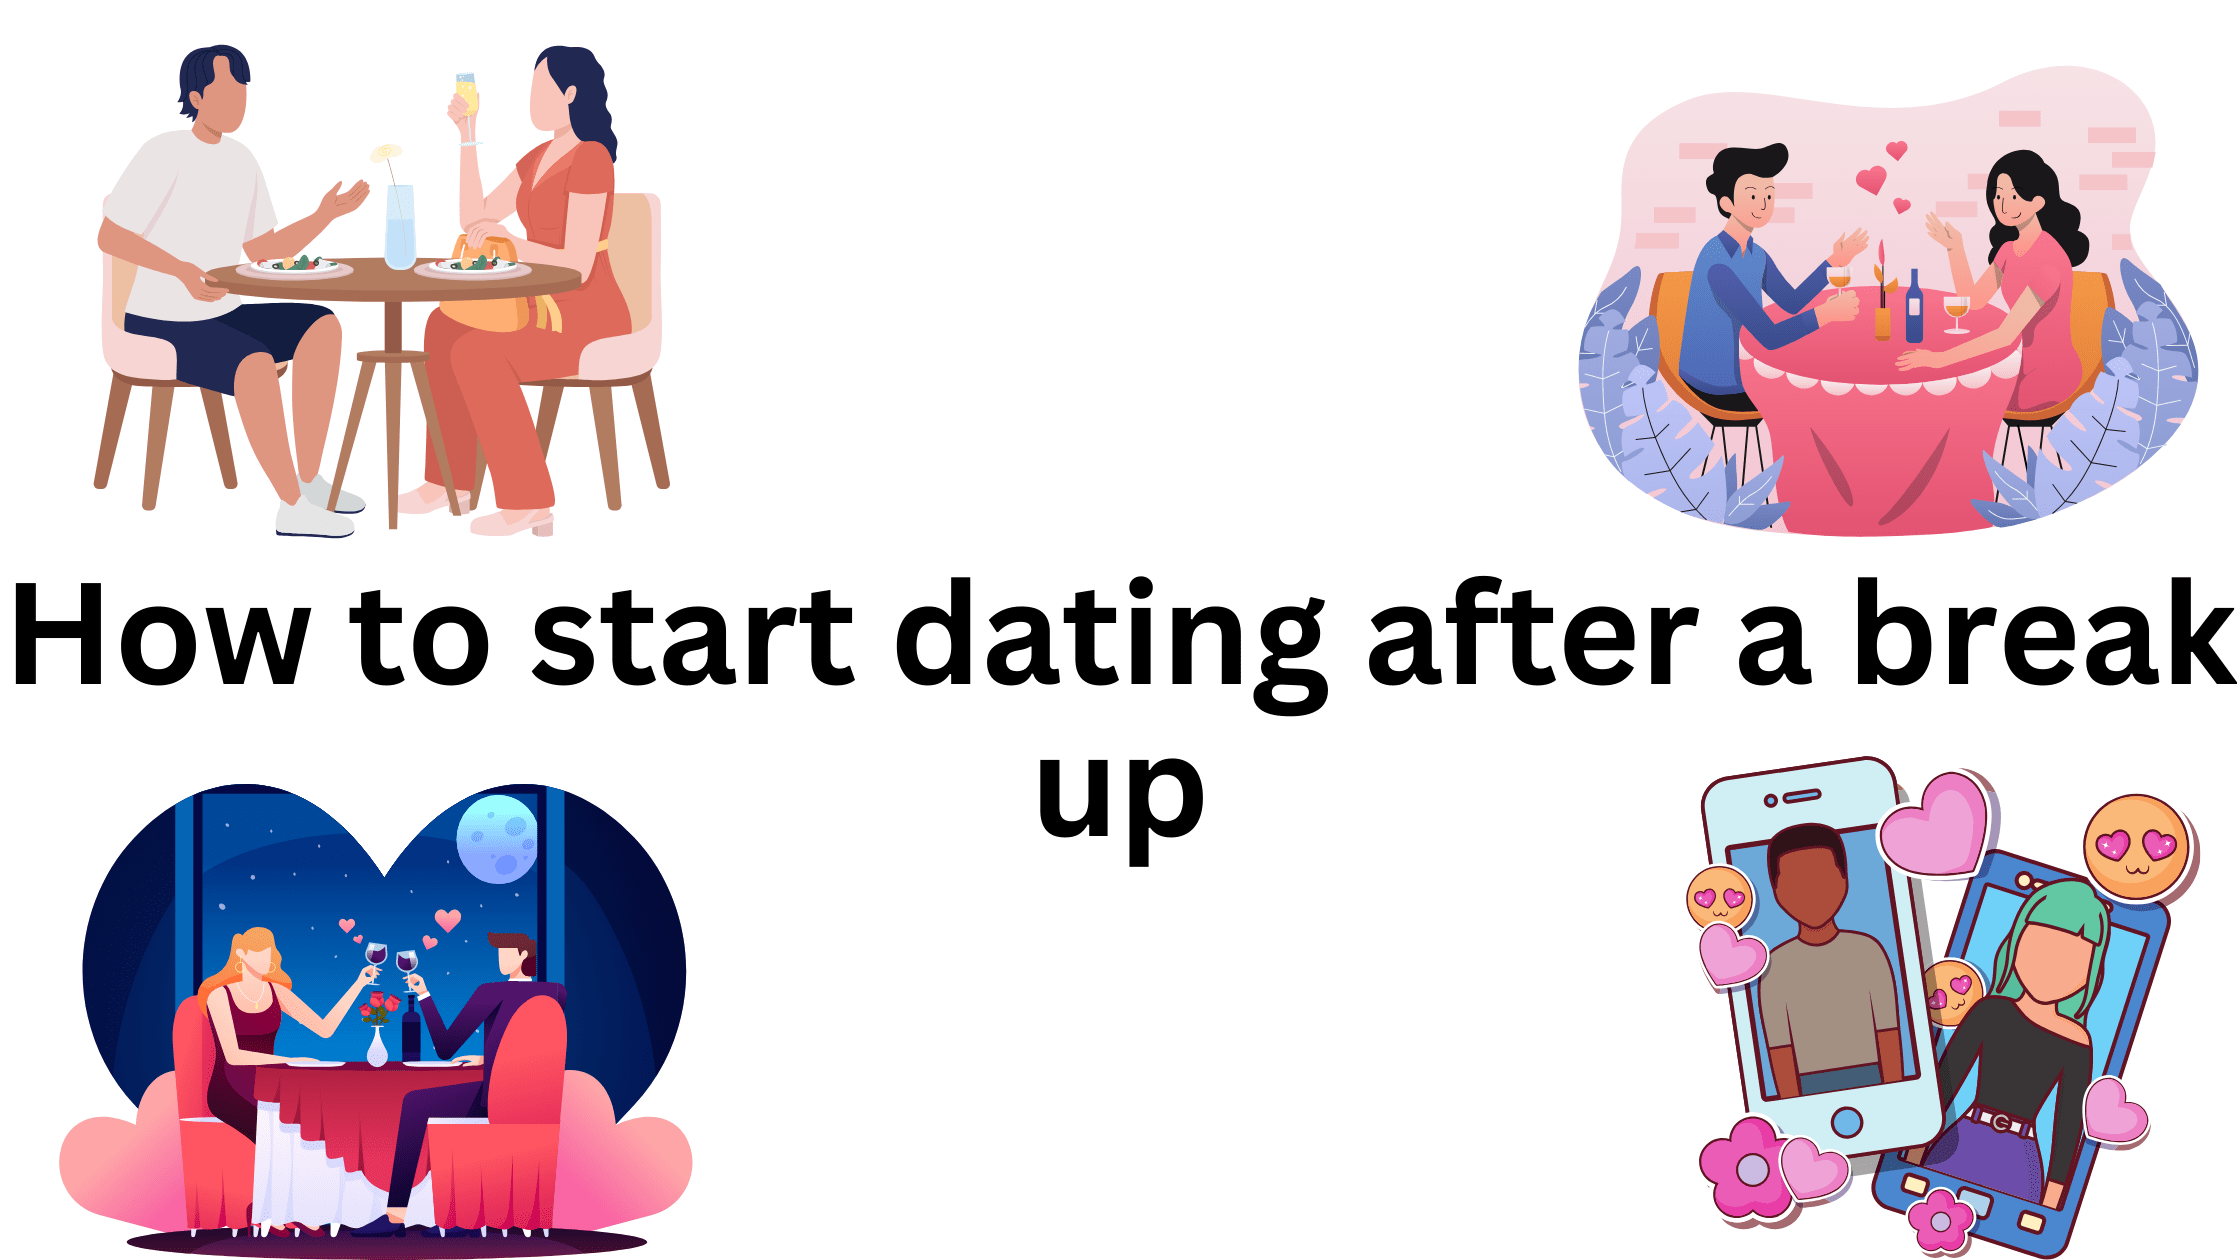 10 Great Ways to Start Dating After a Break Up 8